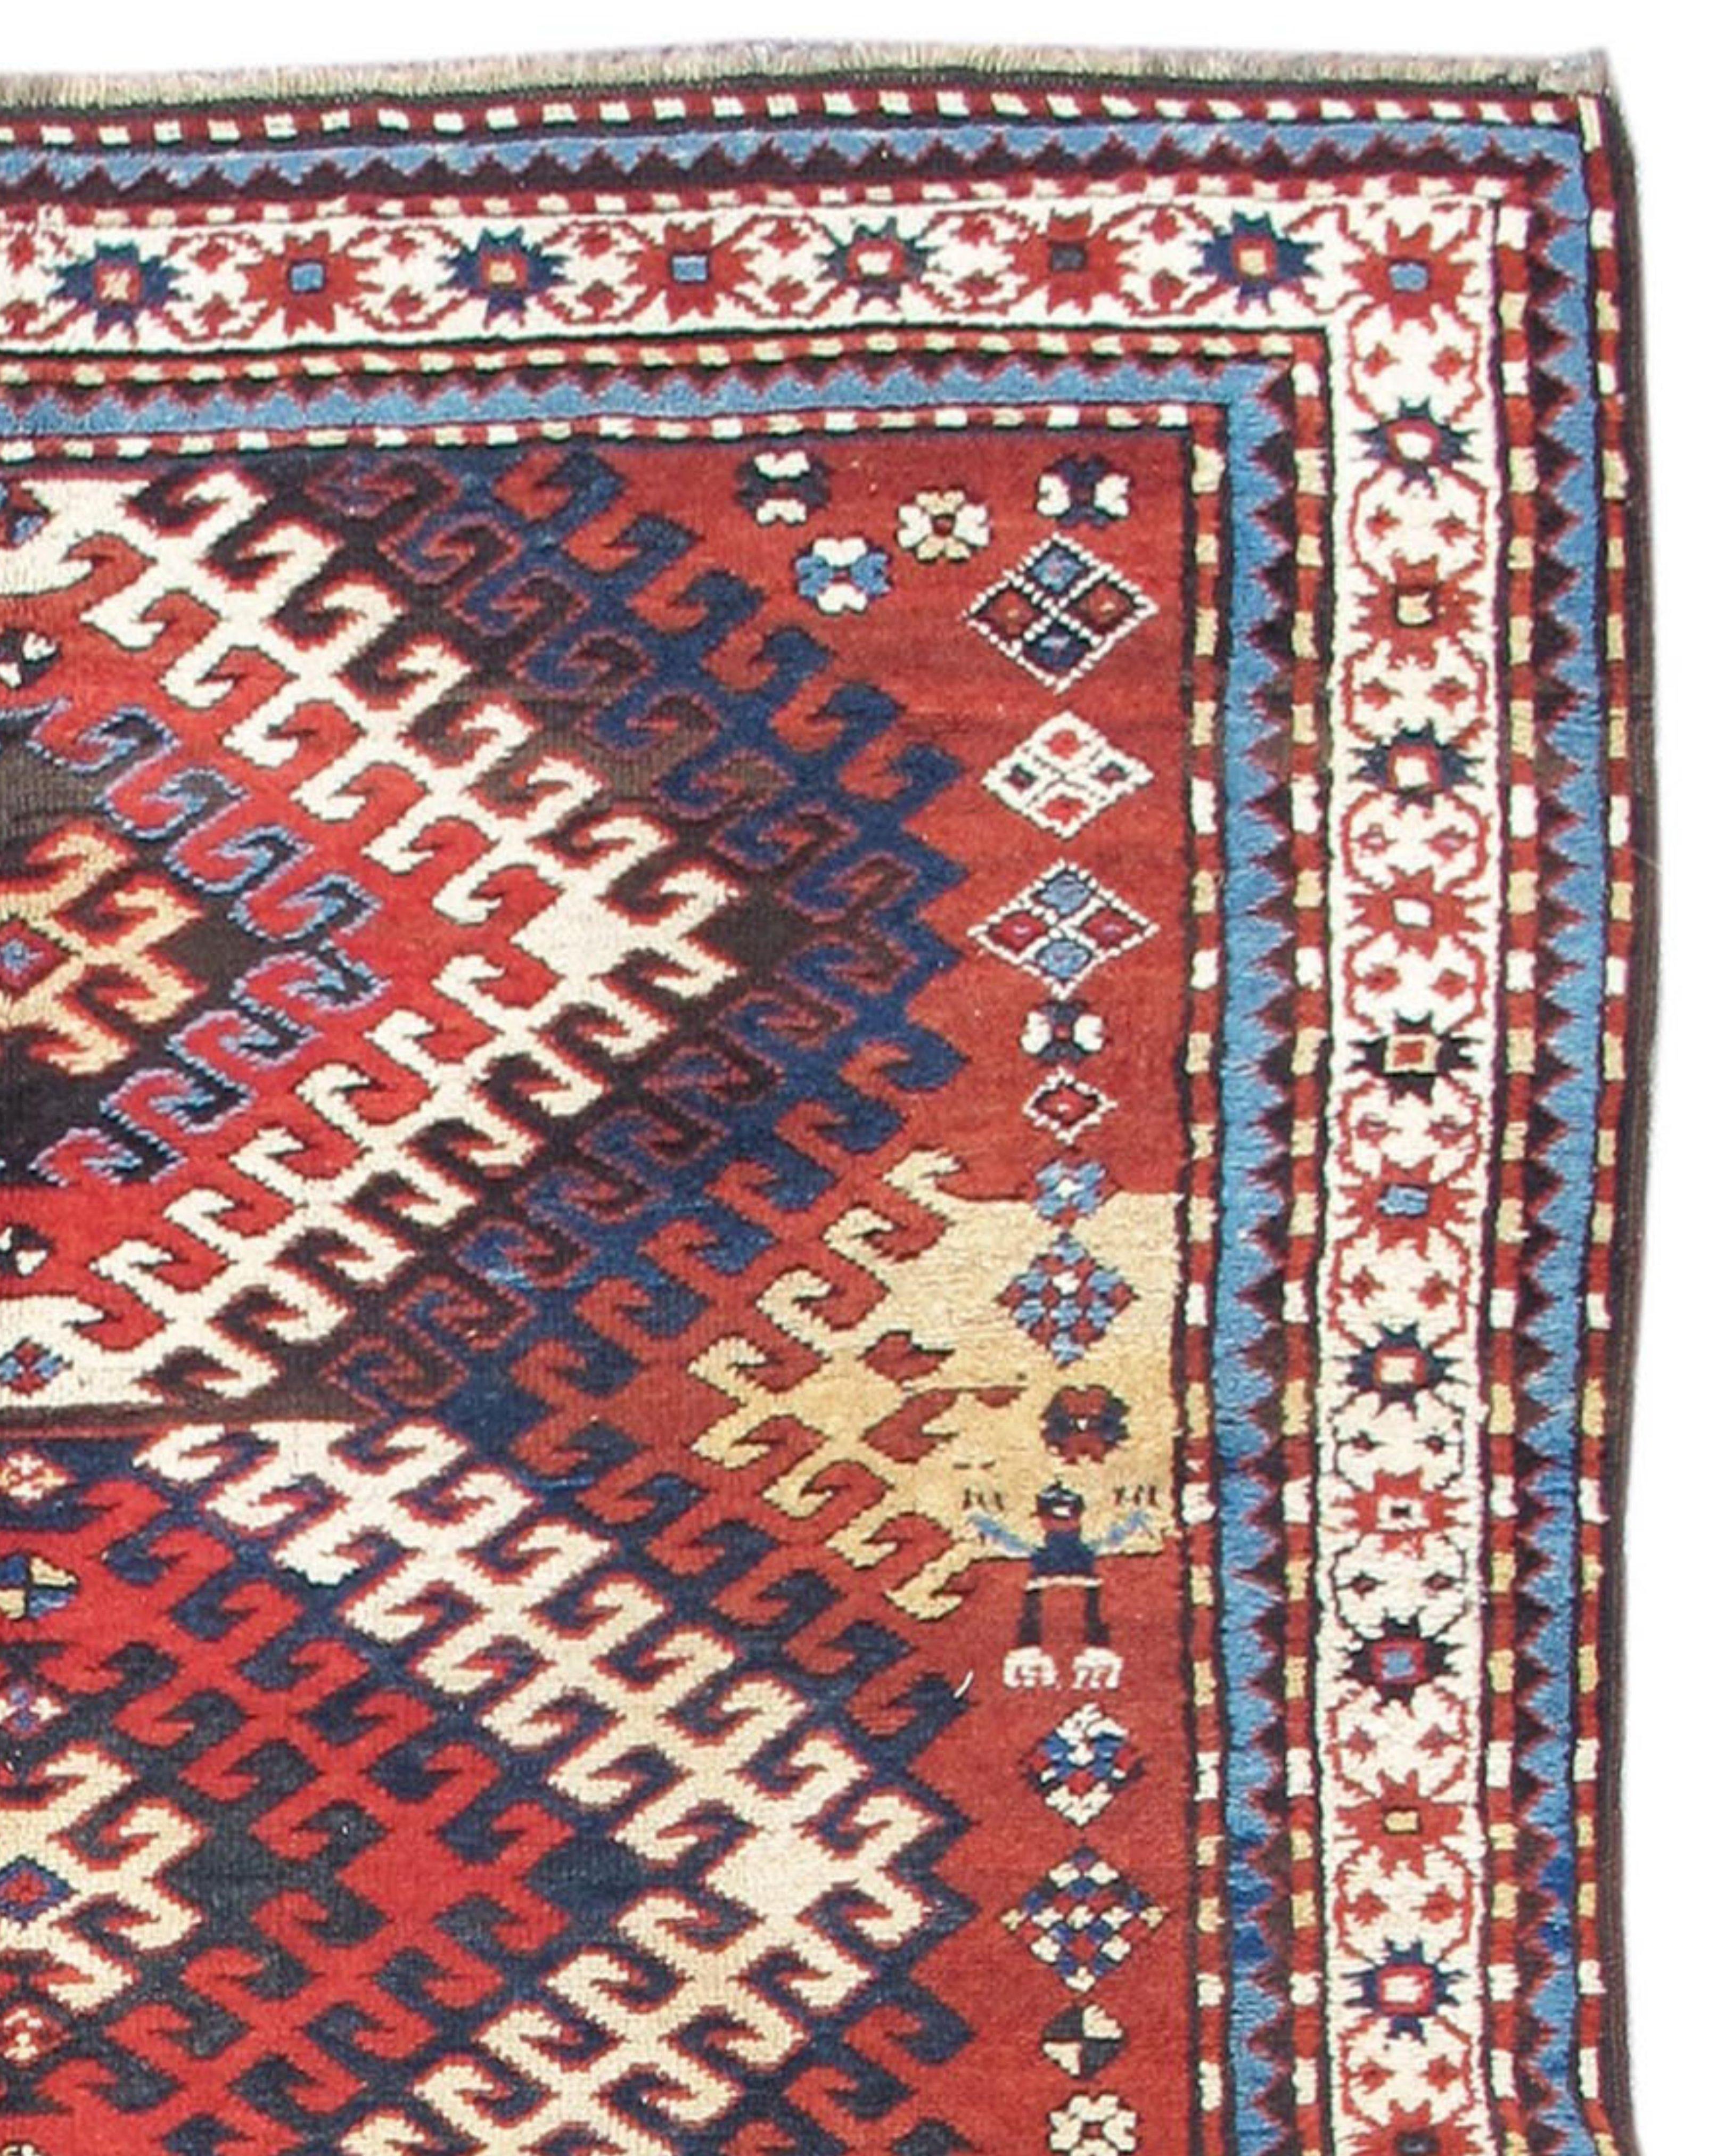 Antique Karabagh Rug, Late 19th Century

Additional Information:
Dimensions: 4'9